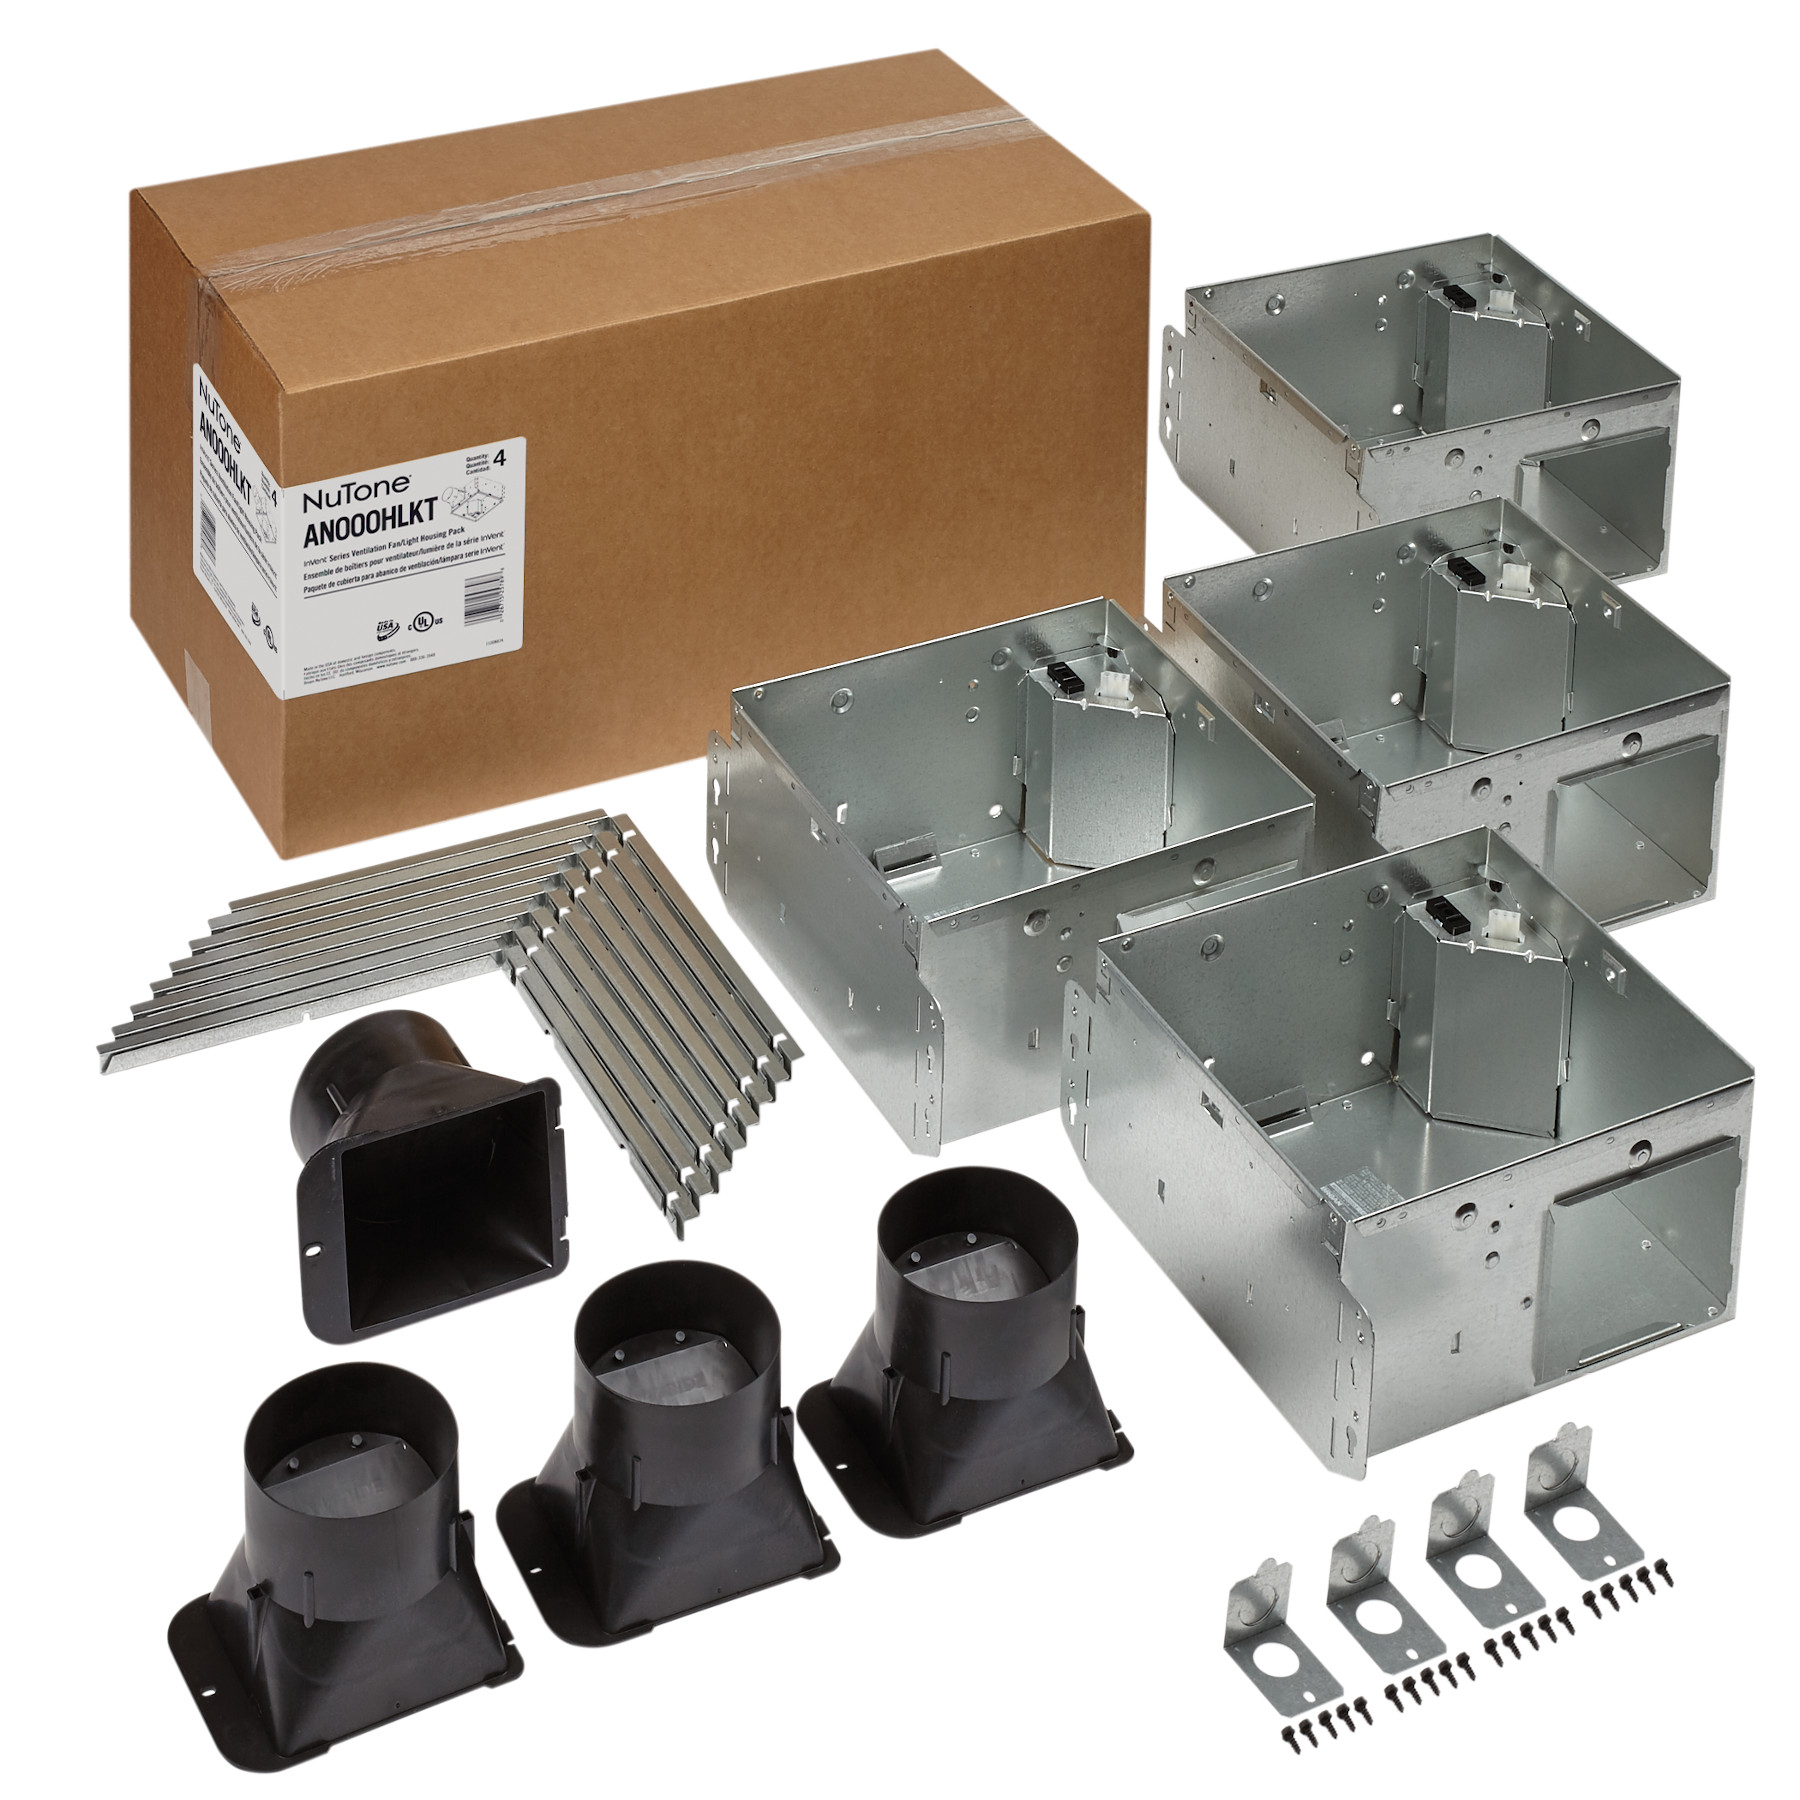 DISCONTINUED: NuTone® Flex Series Ventilation Fan Light Housing Pack with Flange Kit